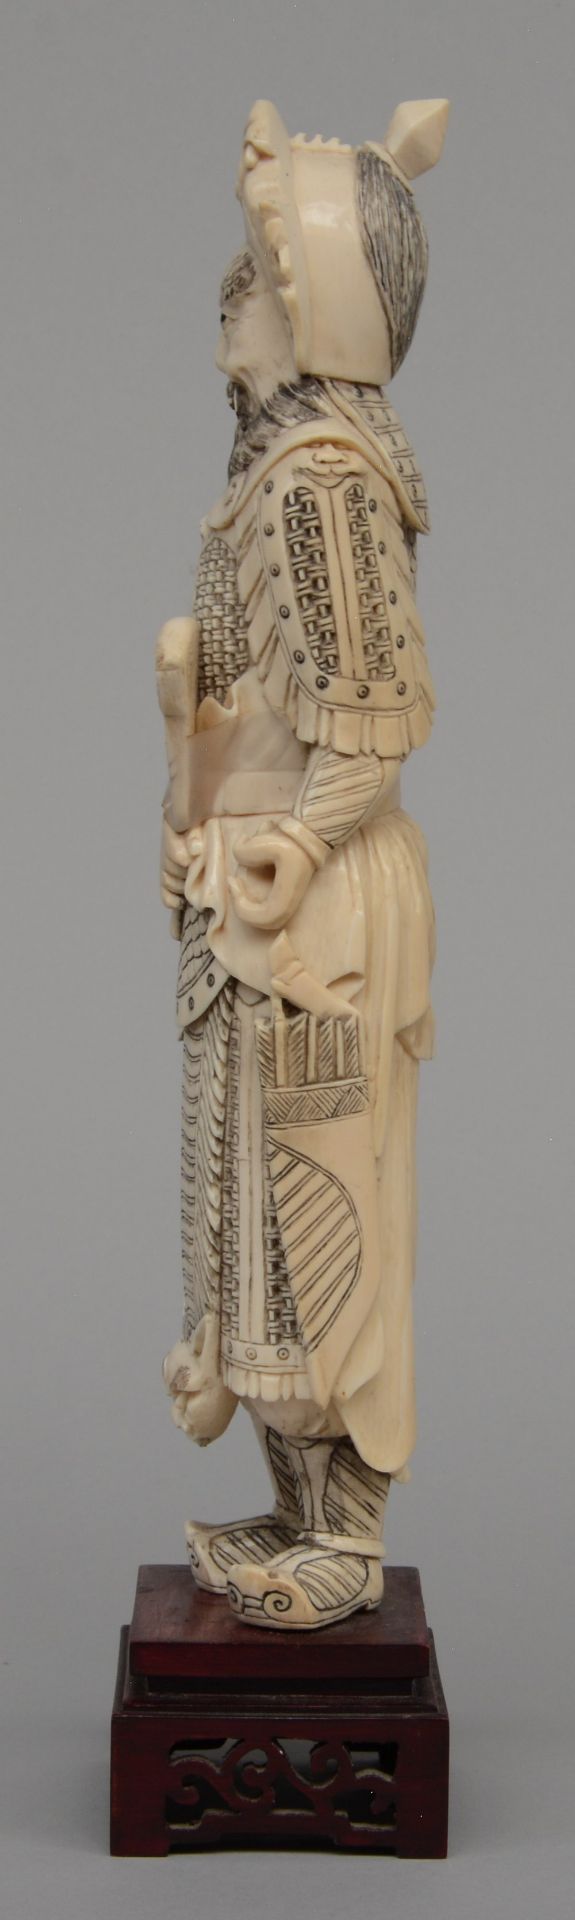 A Chinese ivory carved warrior on a wooden base, ca. 1900, H 35 cm - Image 2 of 6